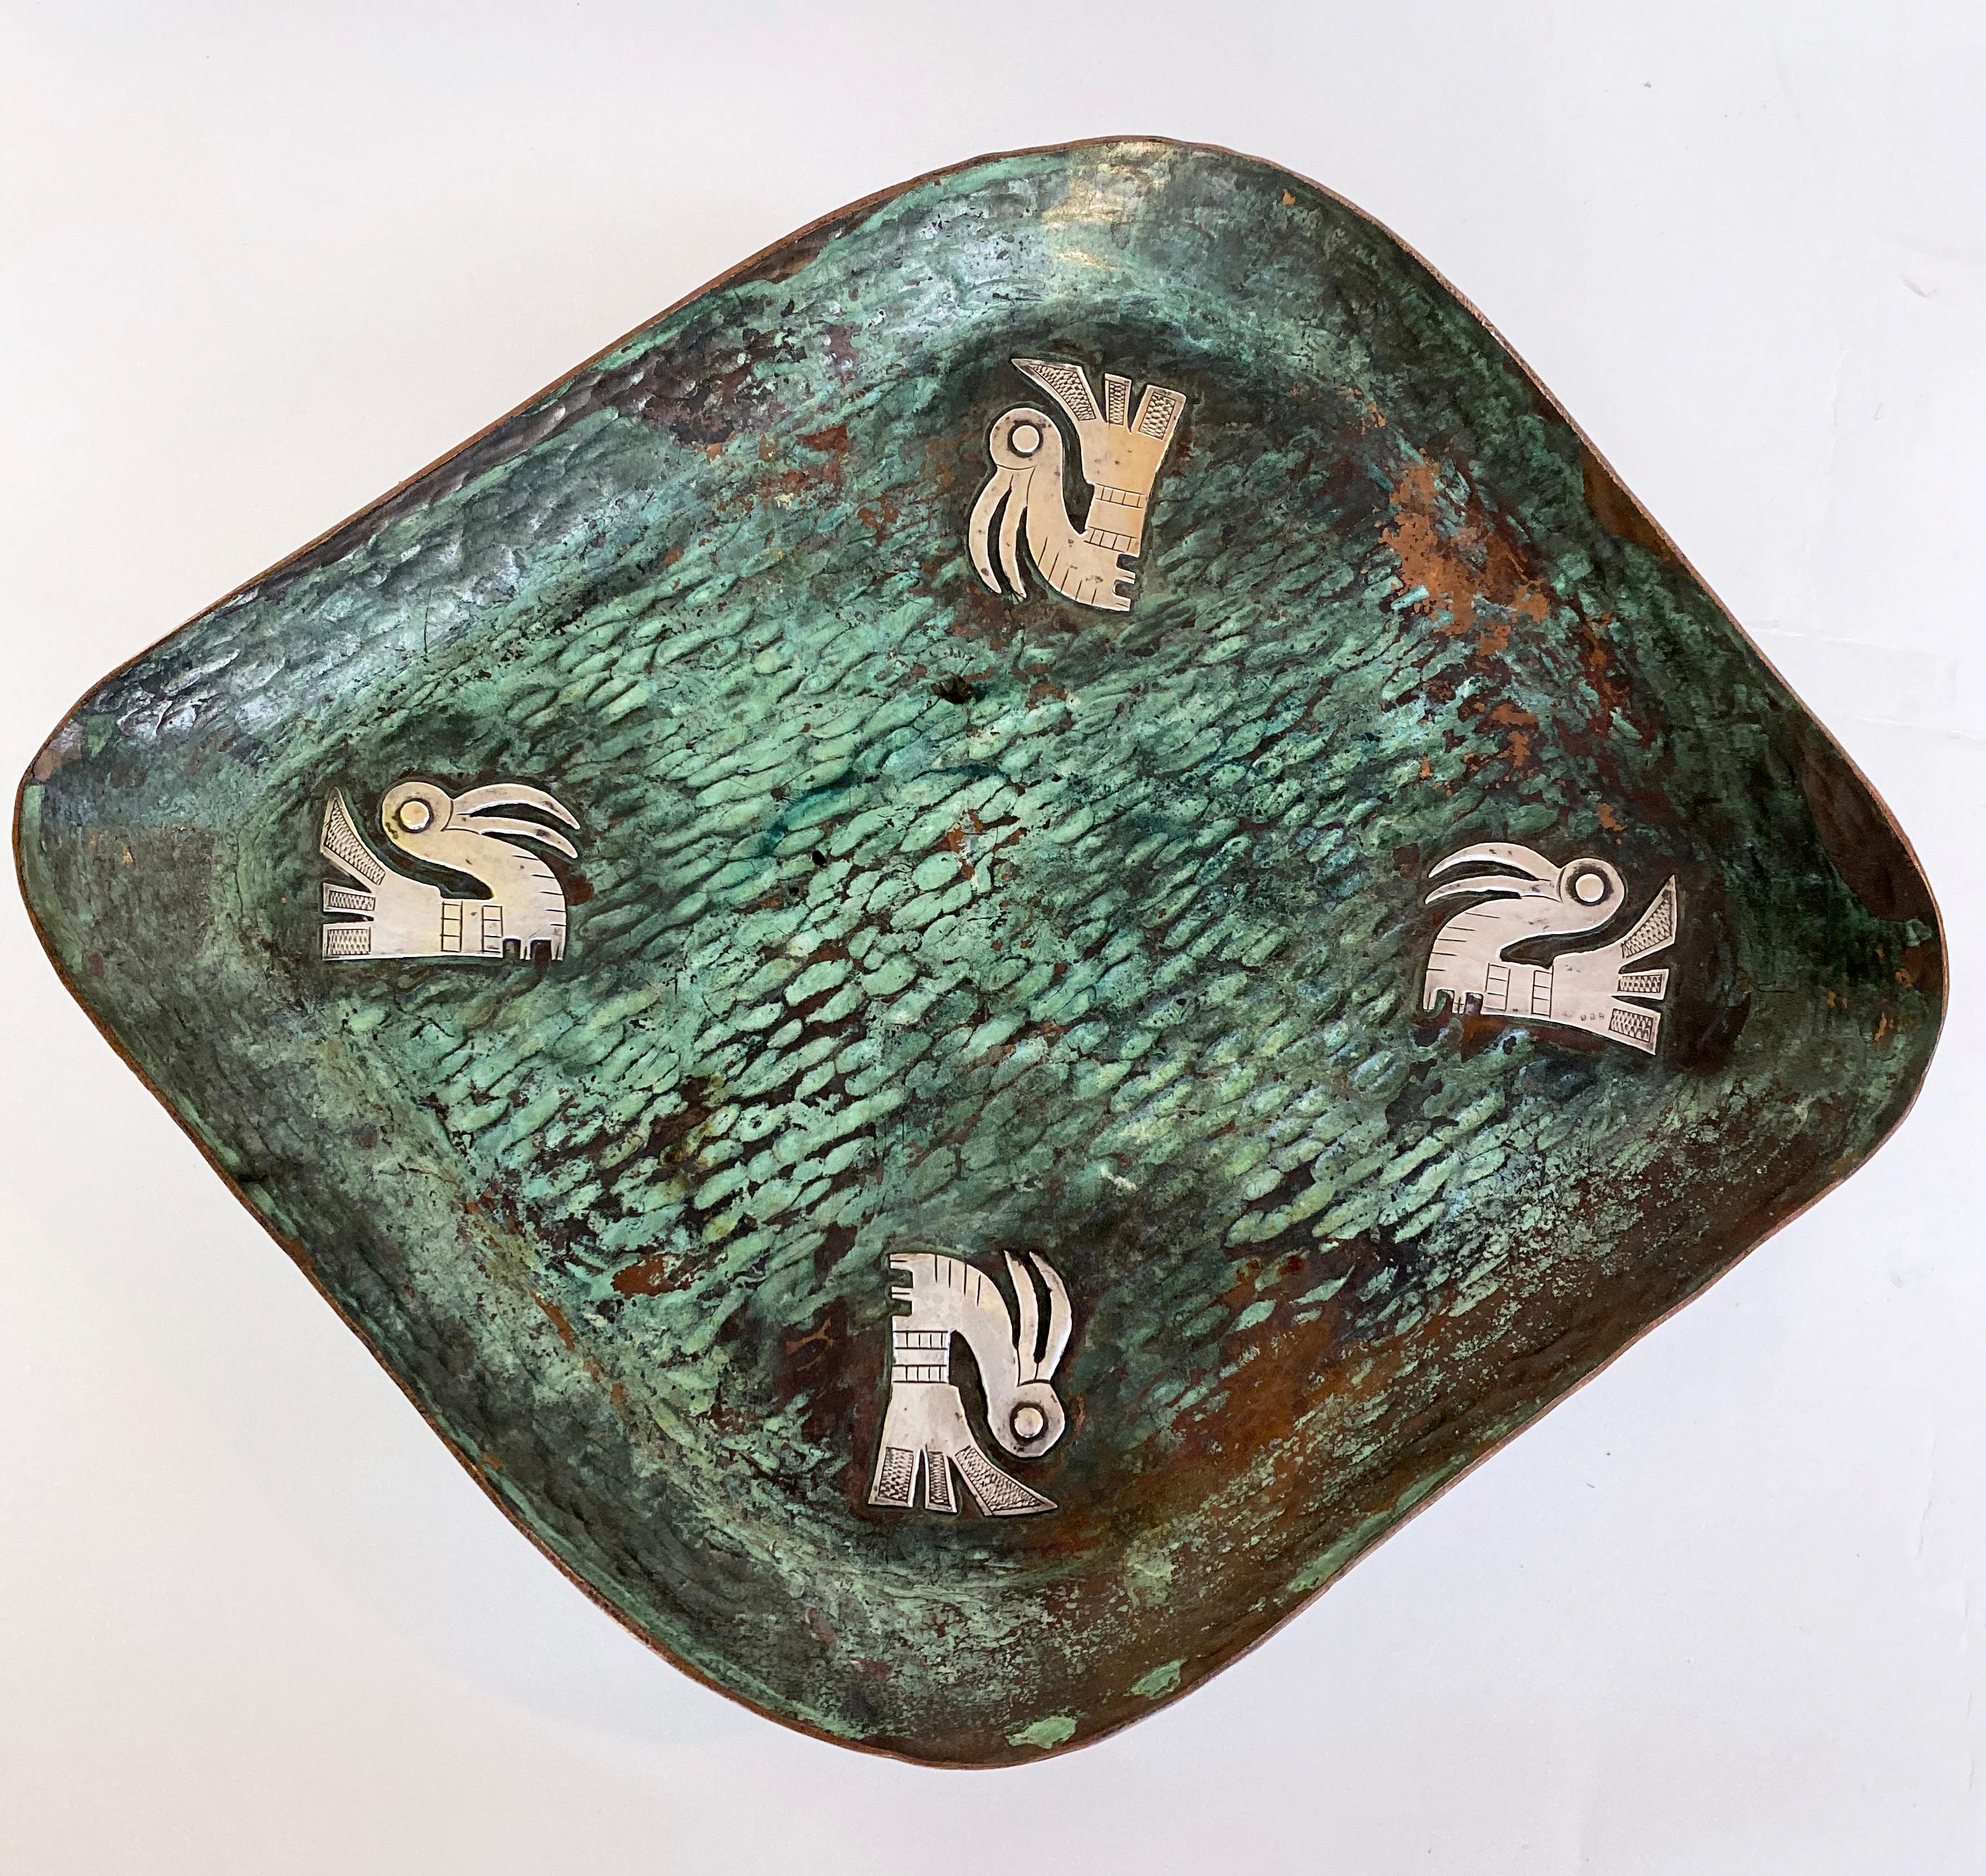 Fabulous hand forged Graziella Laffi Copper and Sterling Tray with four birds. Masterfully created.
Graziella Laffi, often referred to as the “Spratling of Peru” designed and made exceptional silver hollowware, trays and exquisite jewelry pieces in